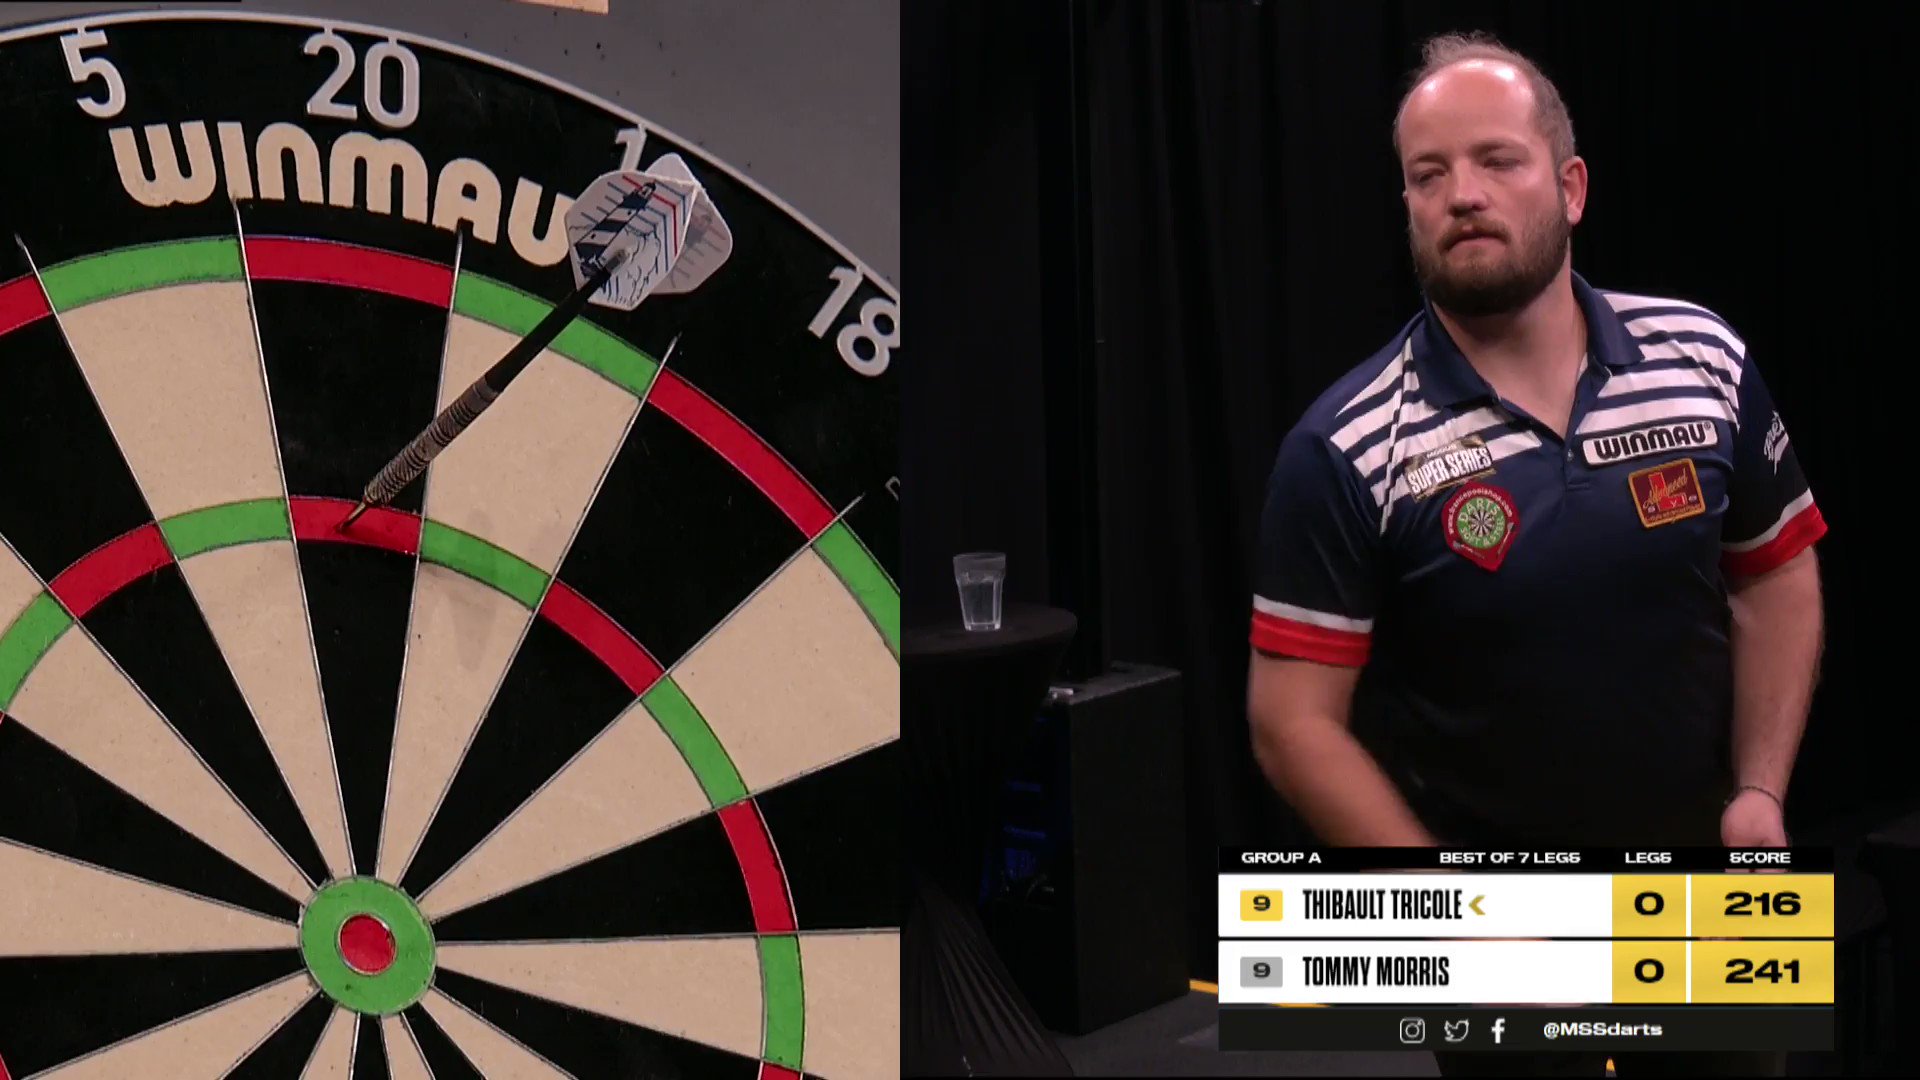 MODUS Series Twitter: "Straight out the blocks! Morris fires in a 14 dart break 🖥https://t.co/qws3n3O6A6 📺 @tv_sporty https://t.co/L6S4Un6HNS" / X